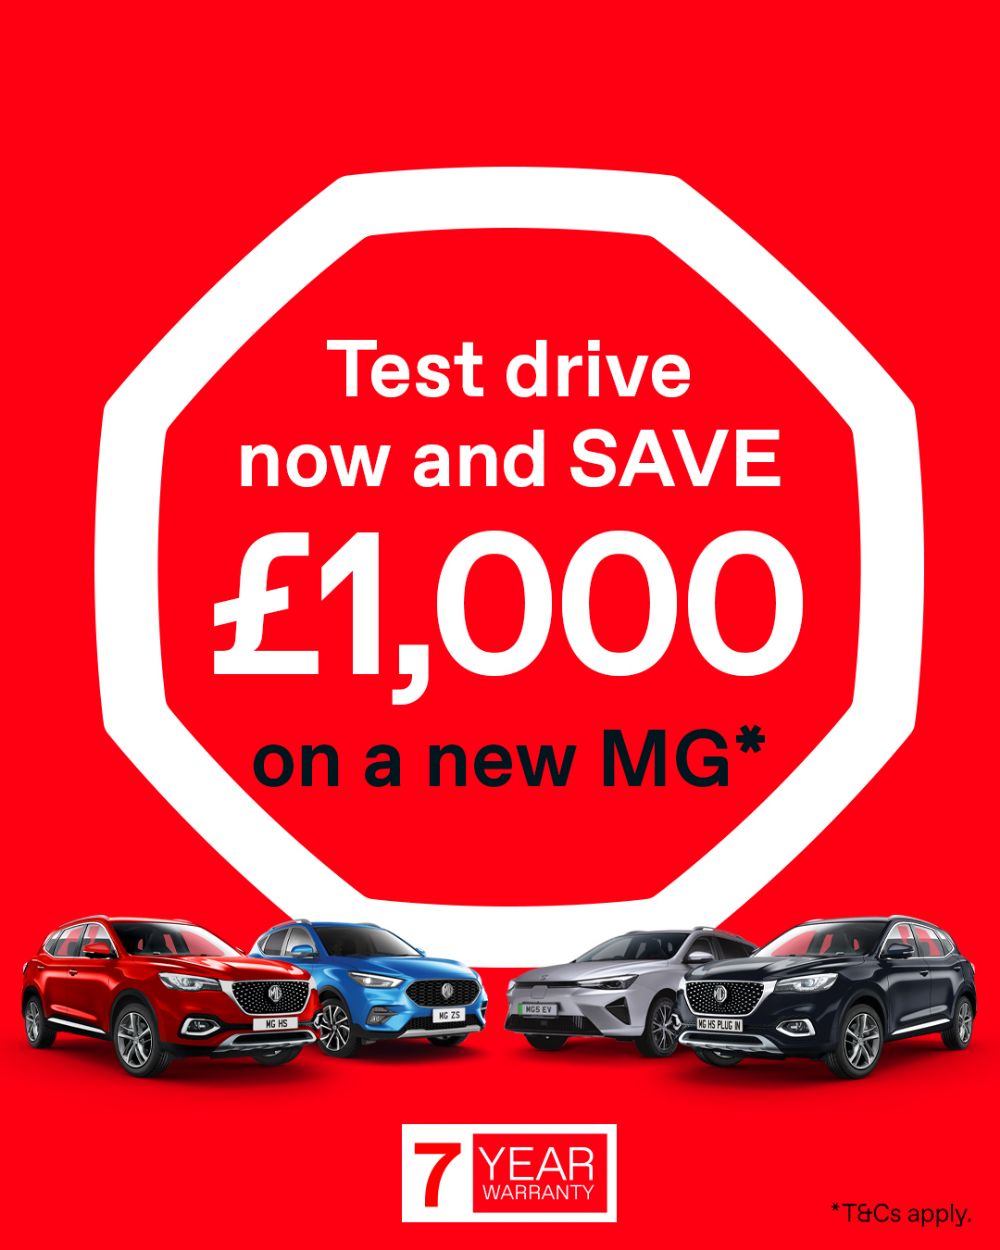 Experience the Future Today with MG's Exclusive £1000 Test Drive Offer!